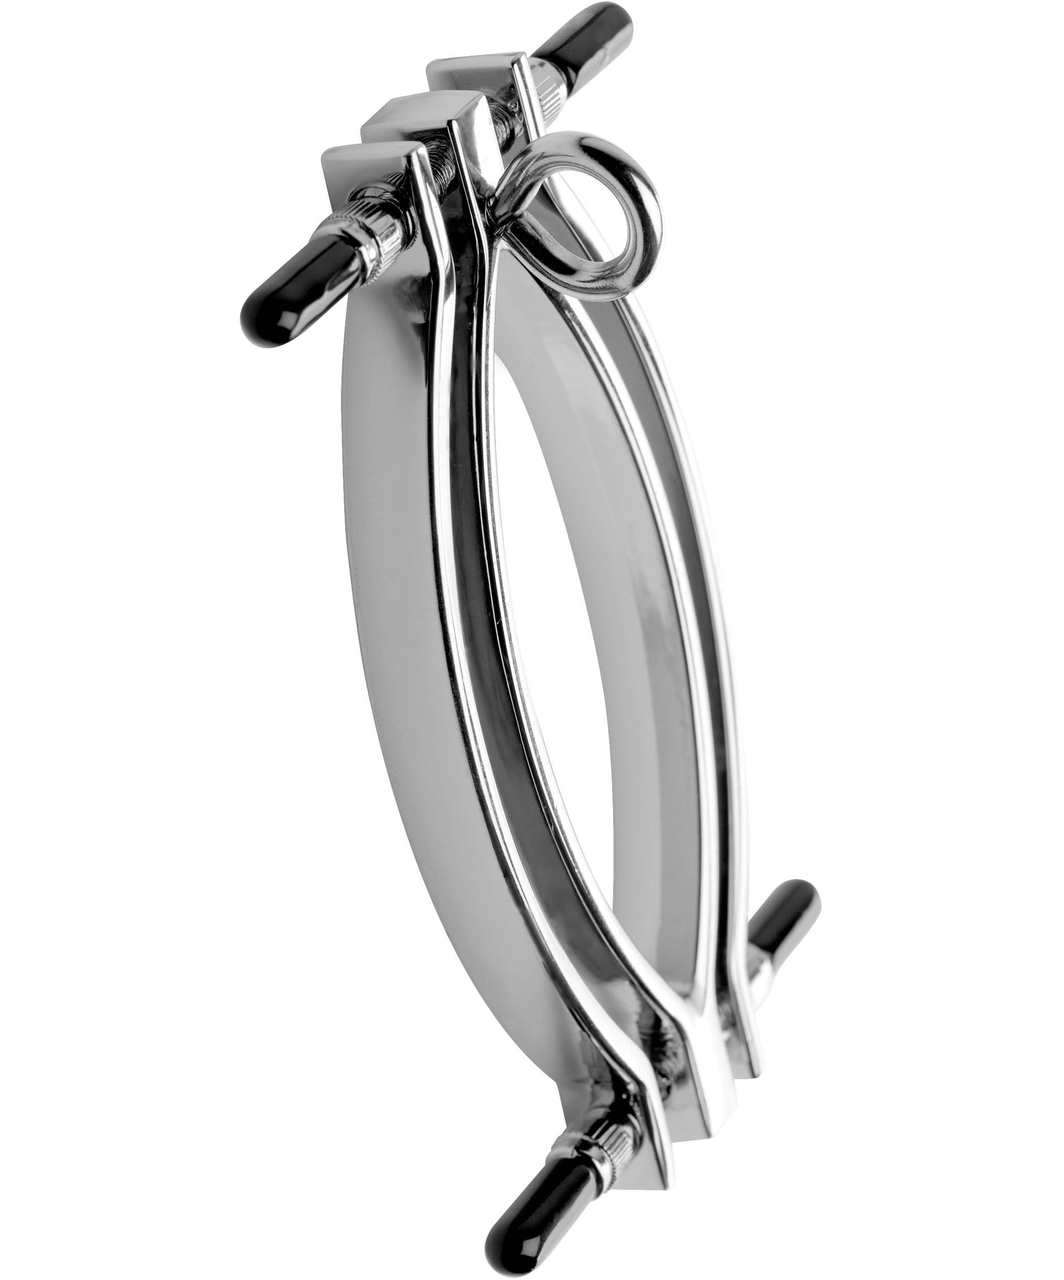 Master Series Pussy Tugger adjustable vulva clamp with leash